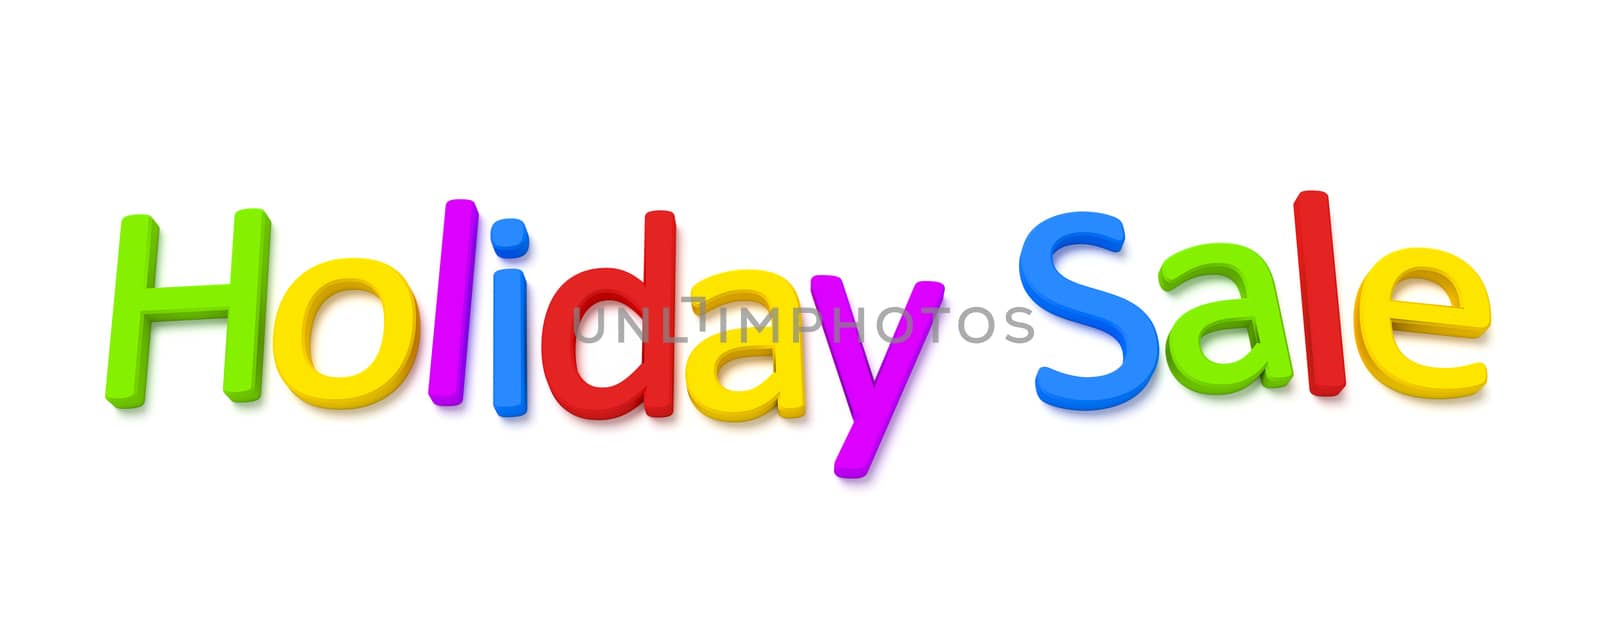 A colourful holiday sale 3D image